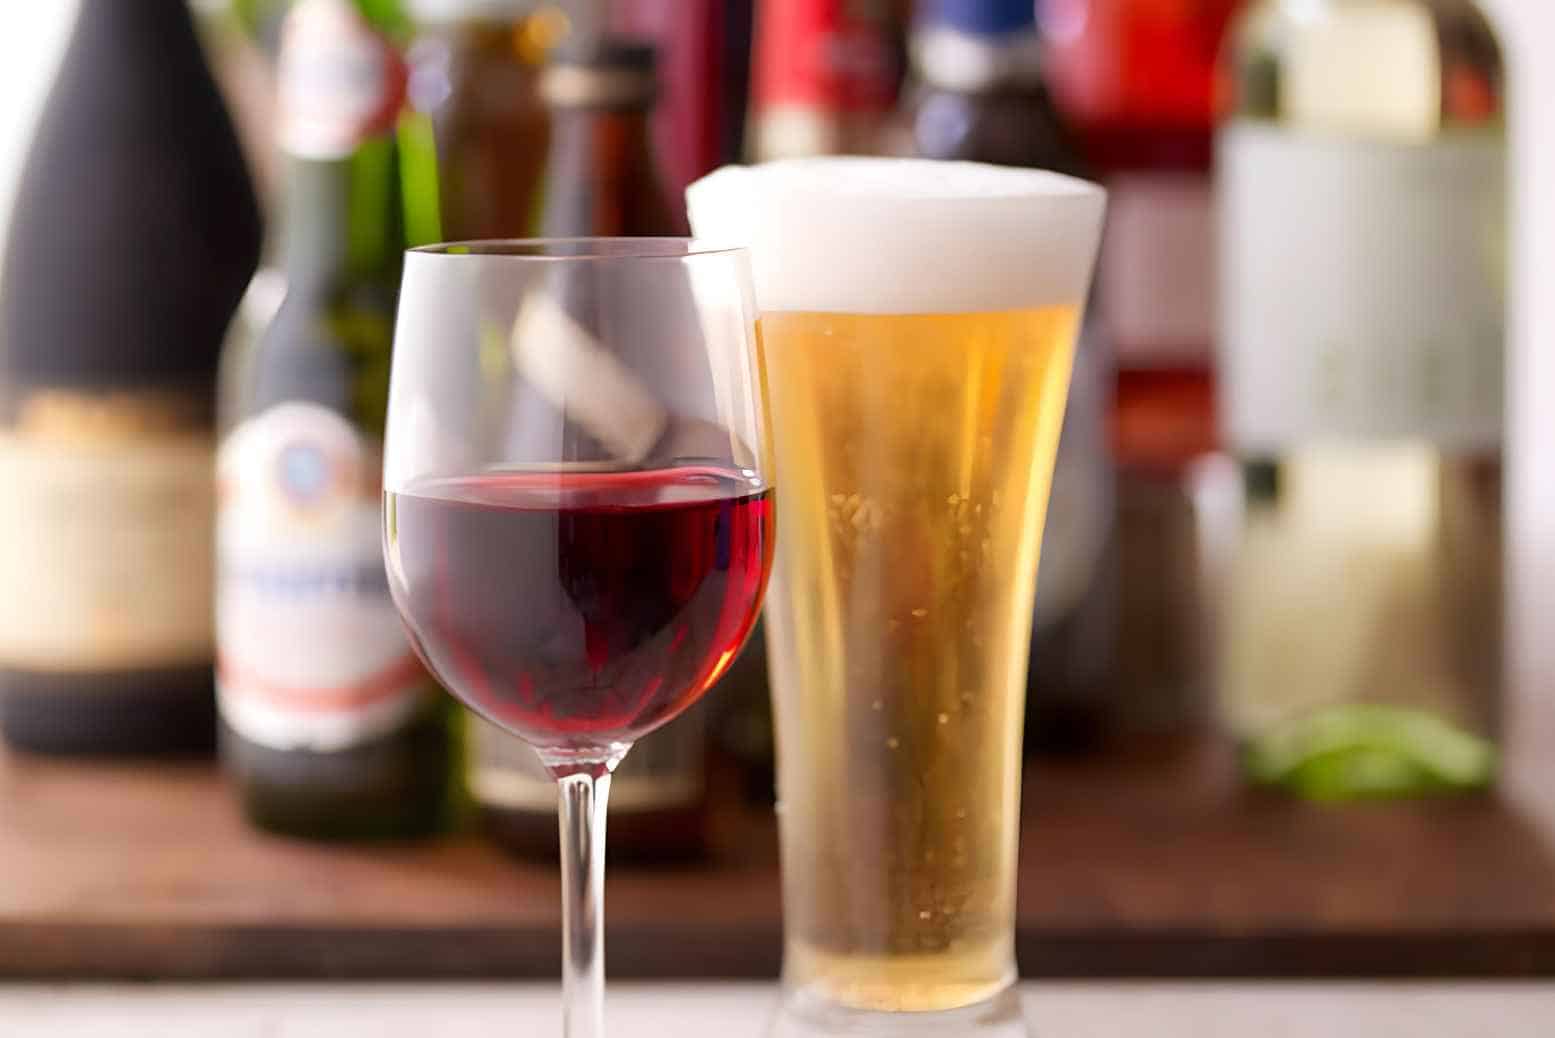 Is Wine Stronger Than Beer